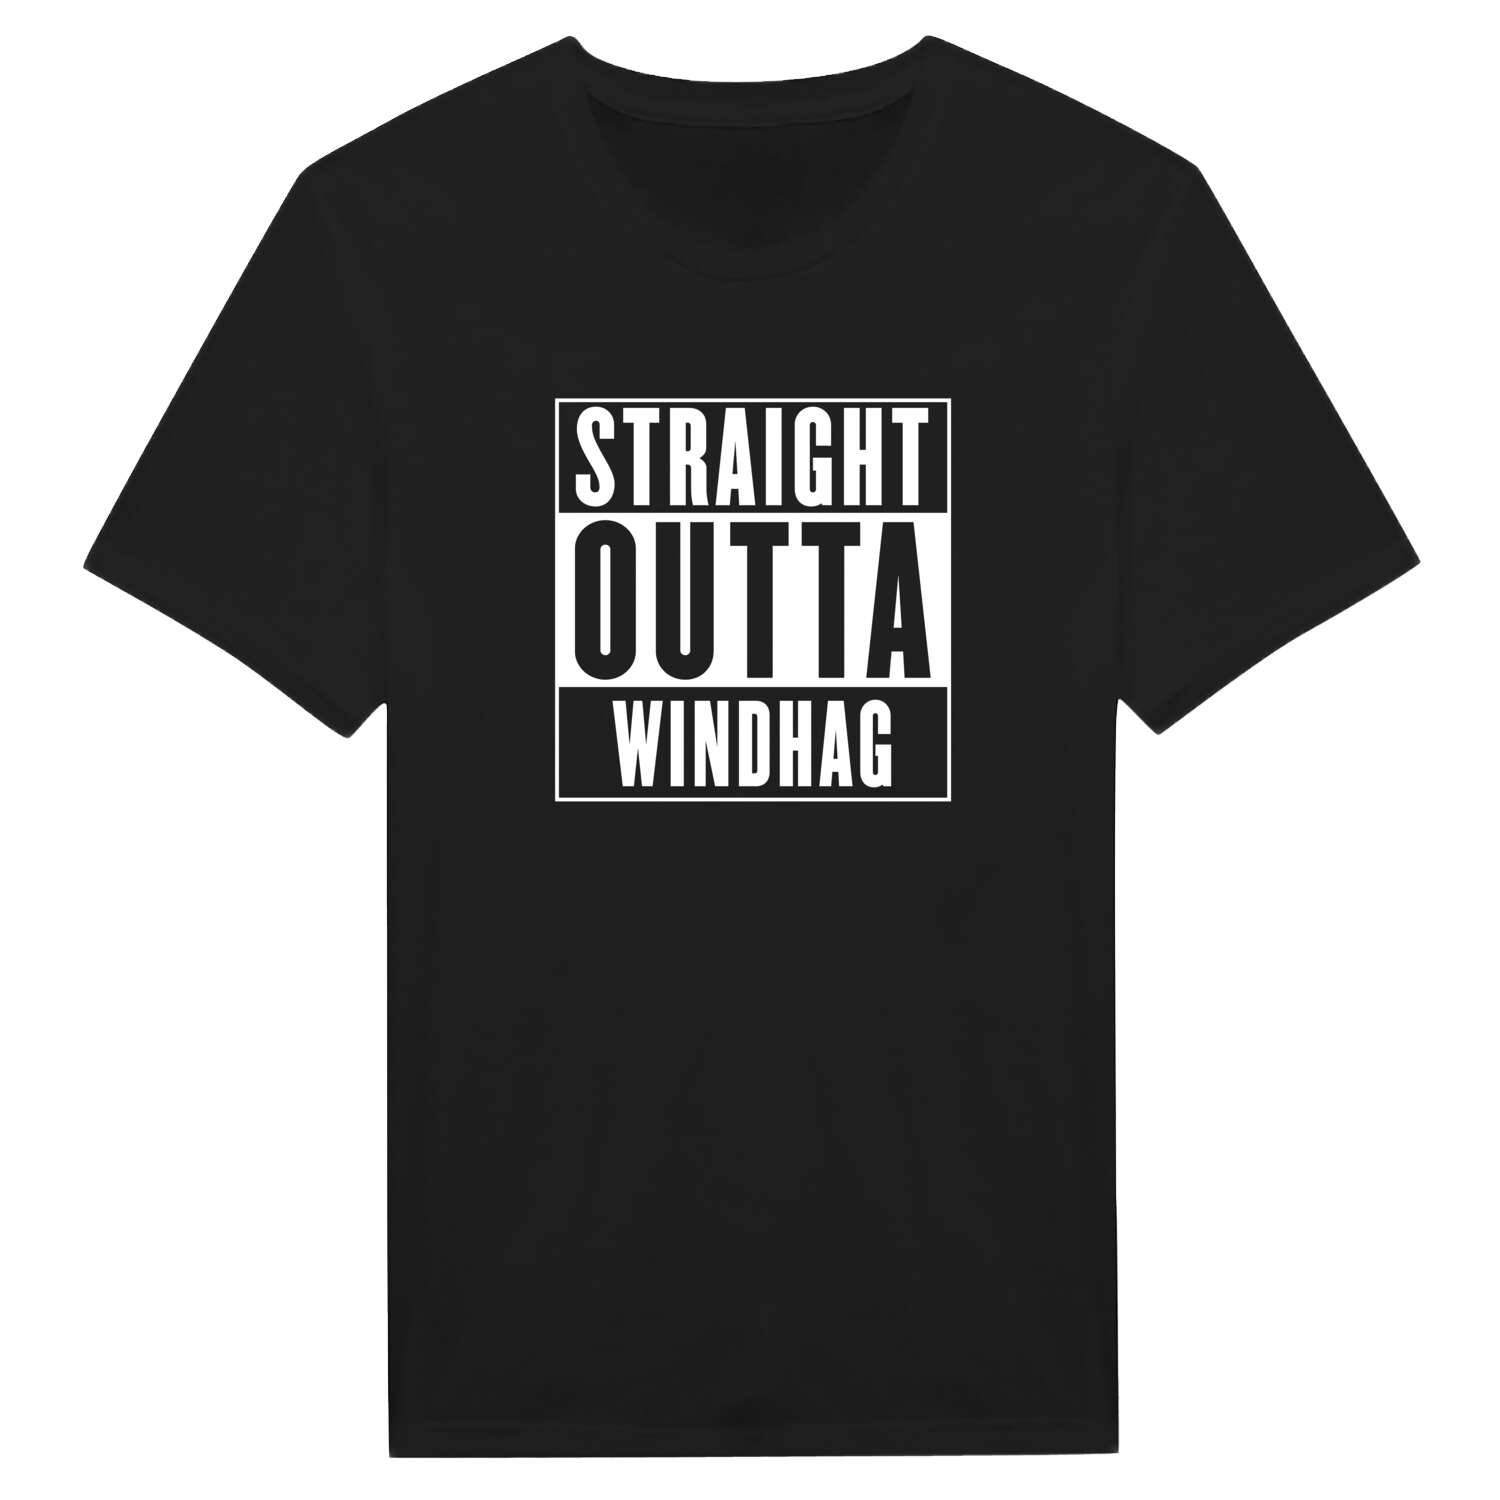 Windhag T-Shirt »Straight Outta«